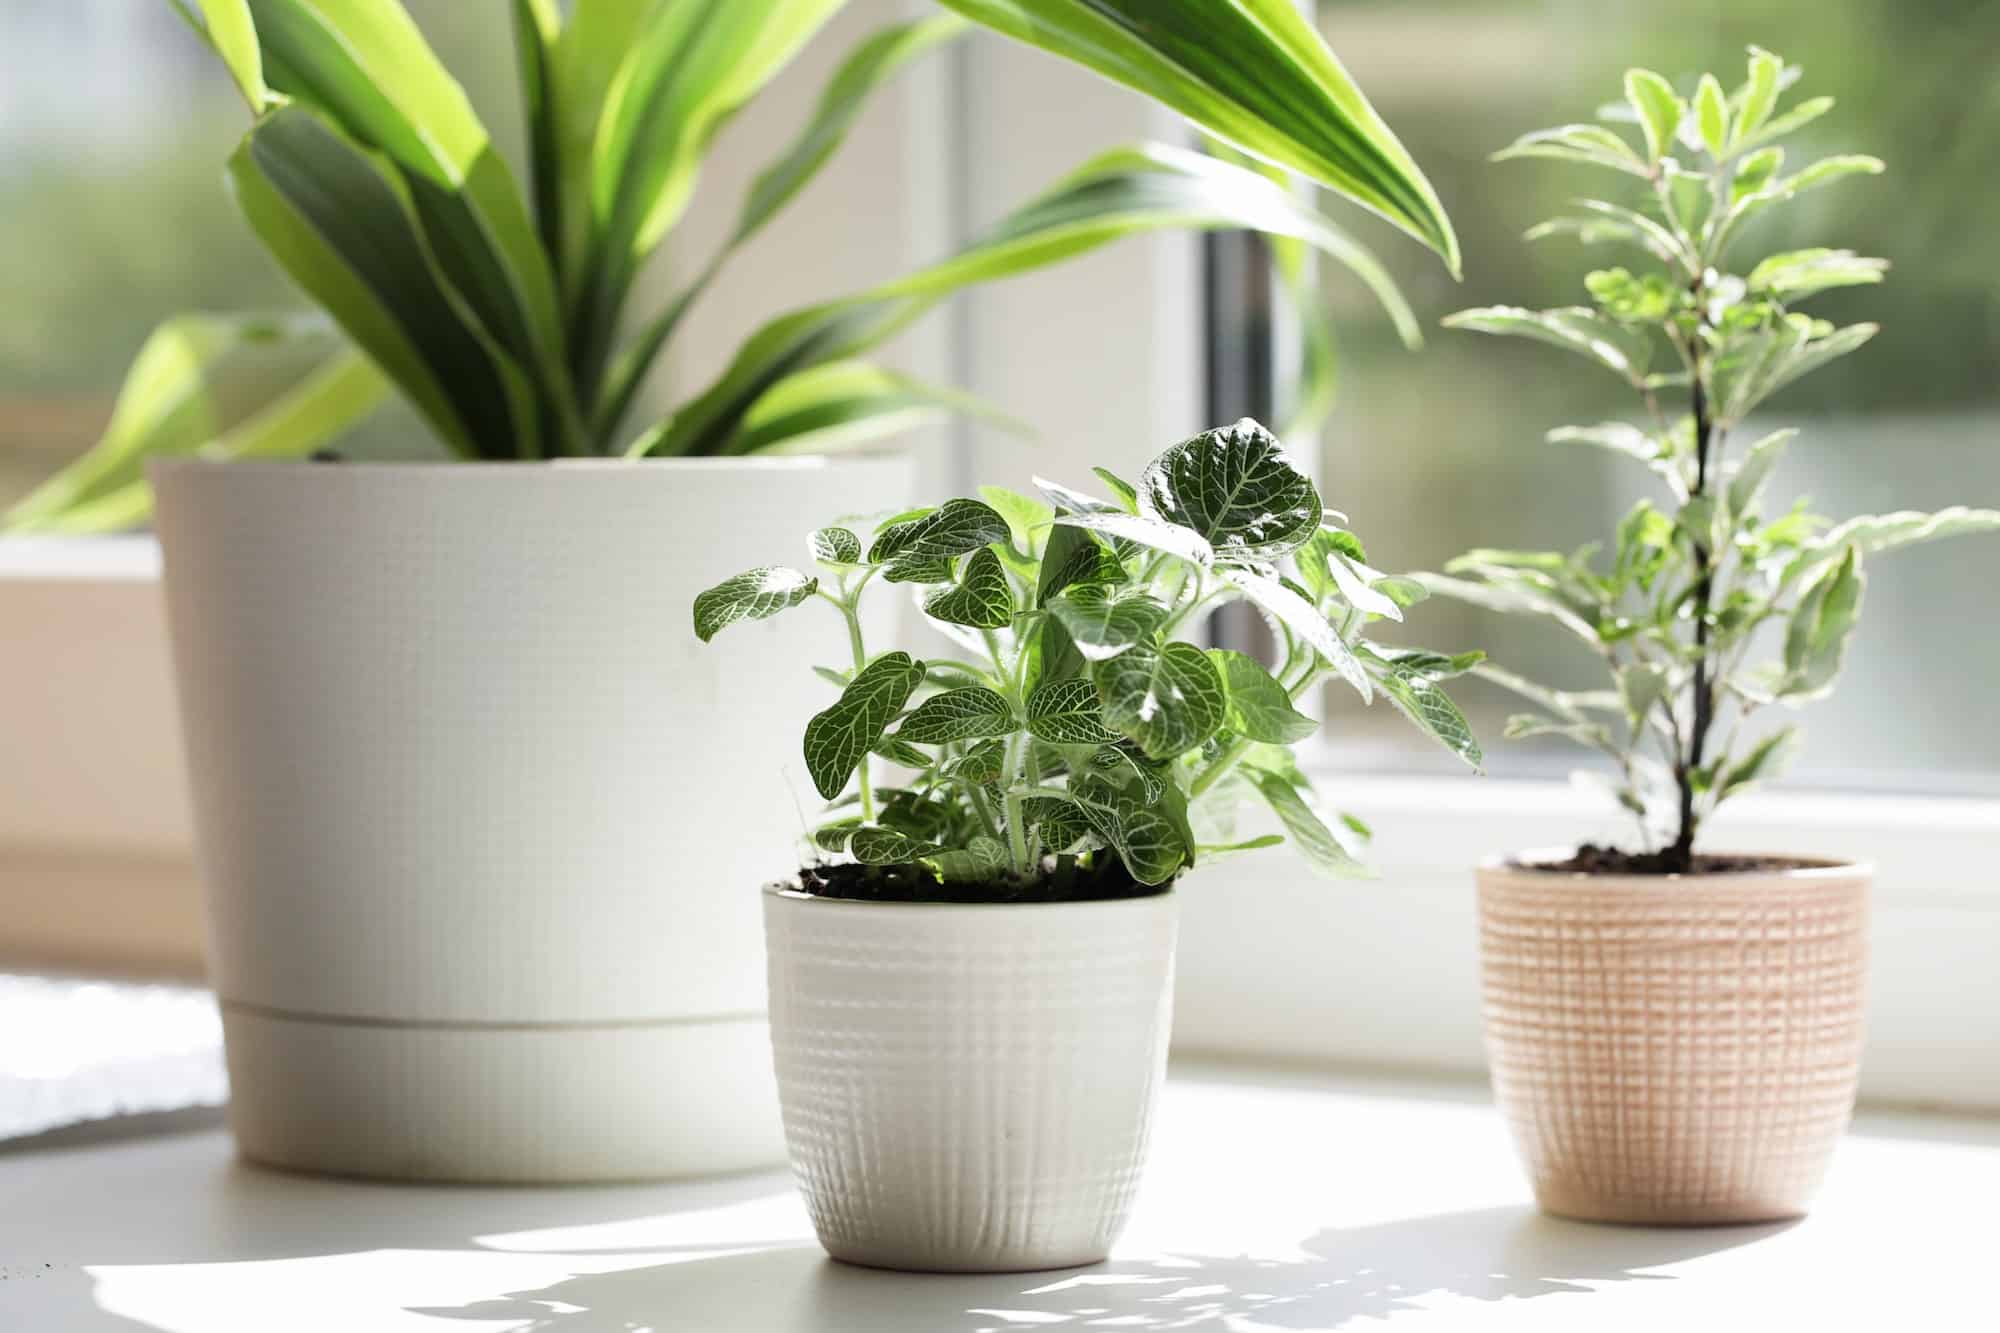 Houseplants contributing to natural indoor air quality.